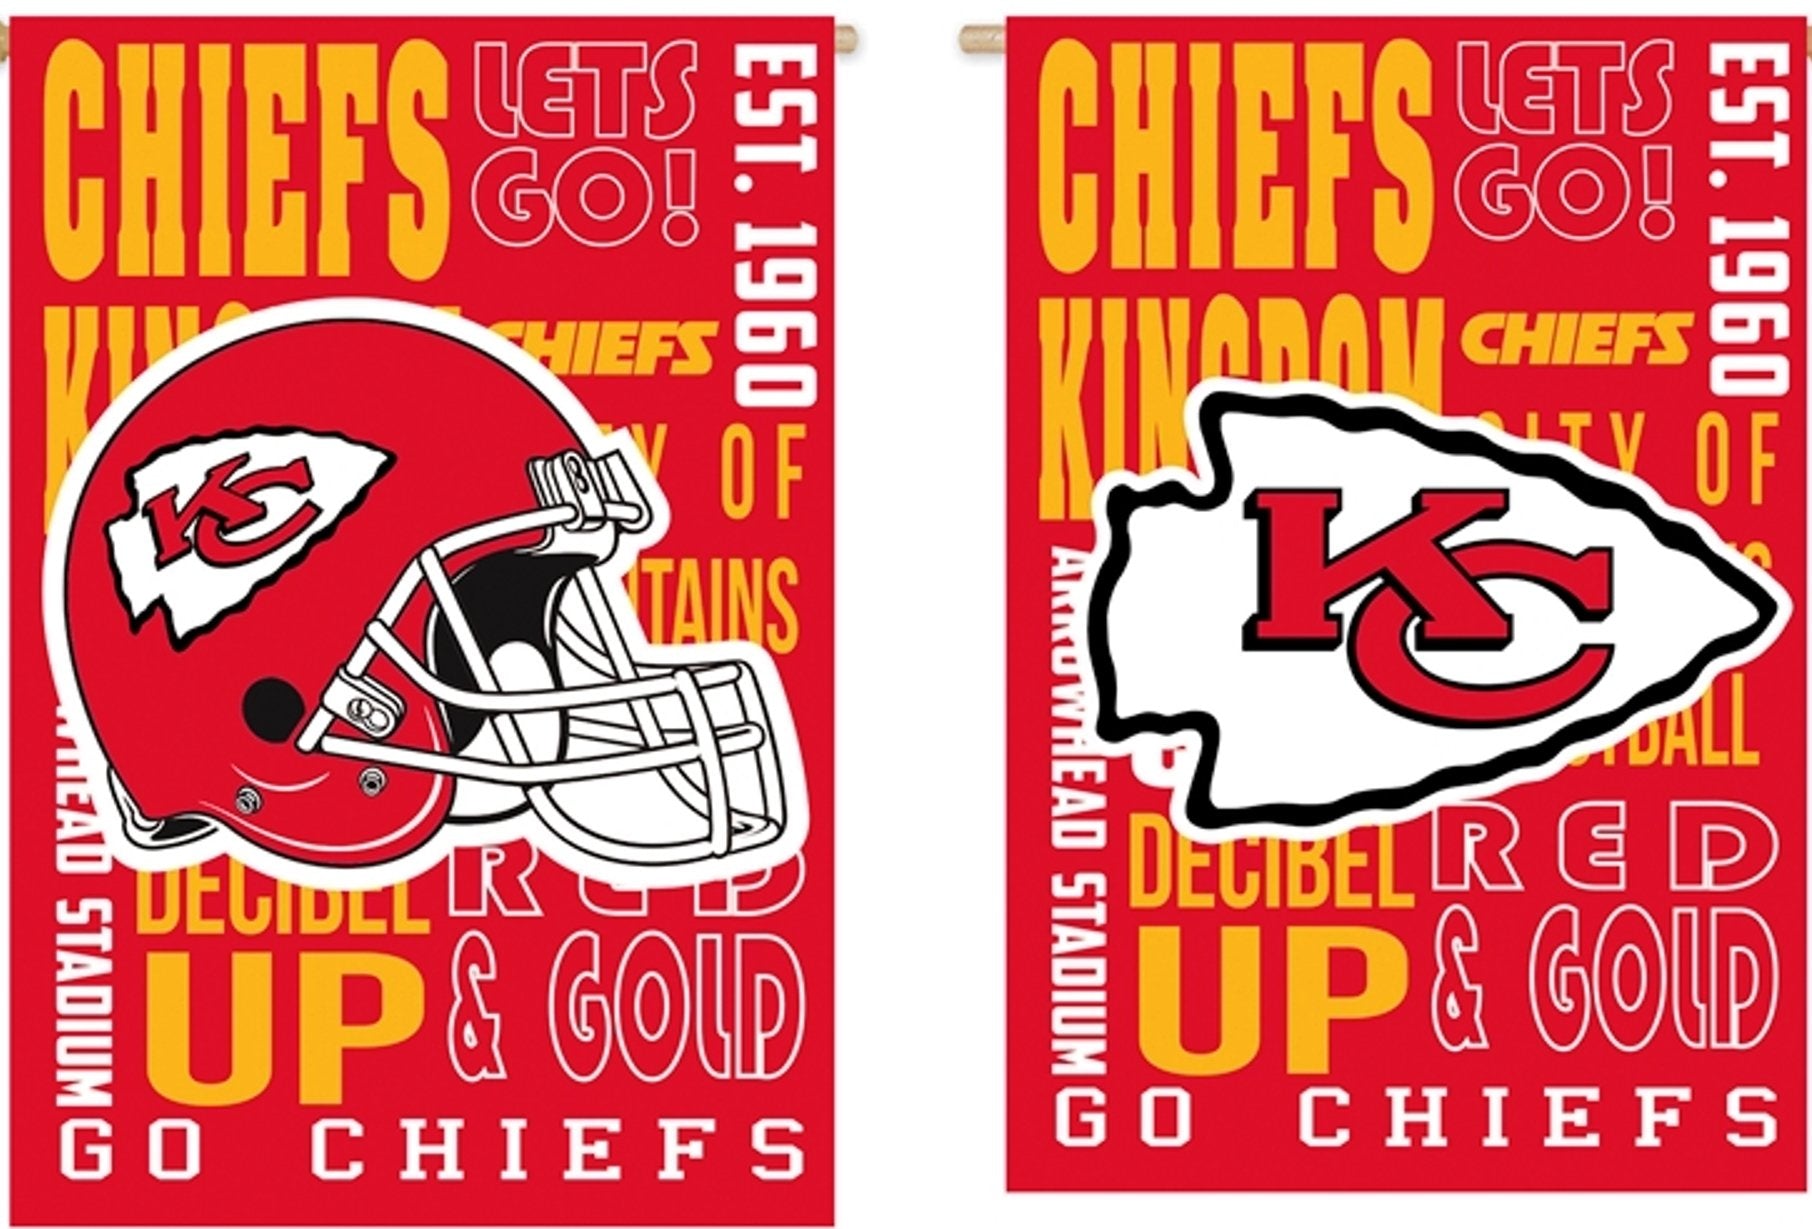 Kansas City Chiefs Premium Double Sided Banner Flag 28x44 Inch Fan Rules Design Indoor Outdoor